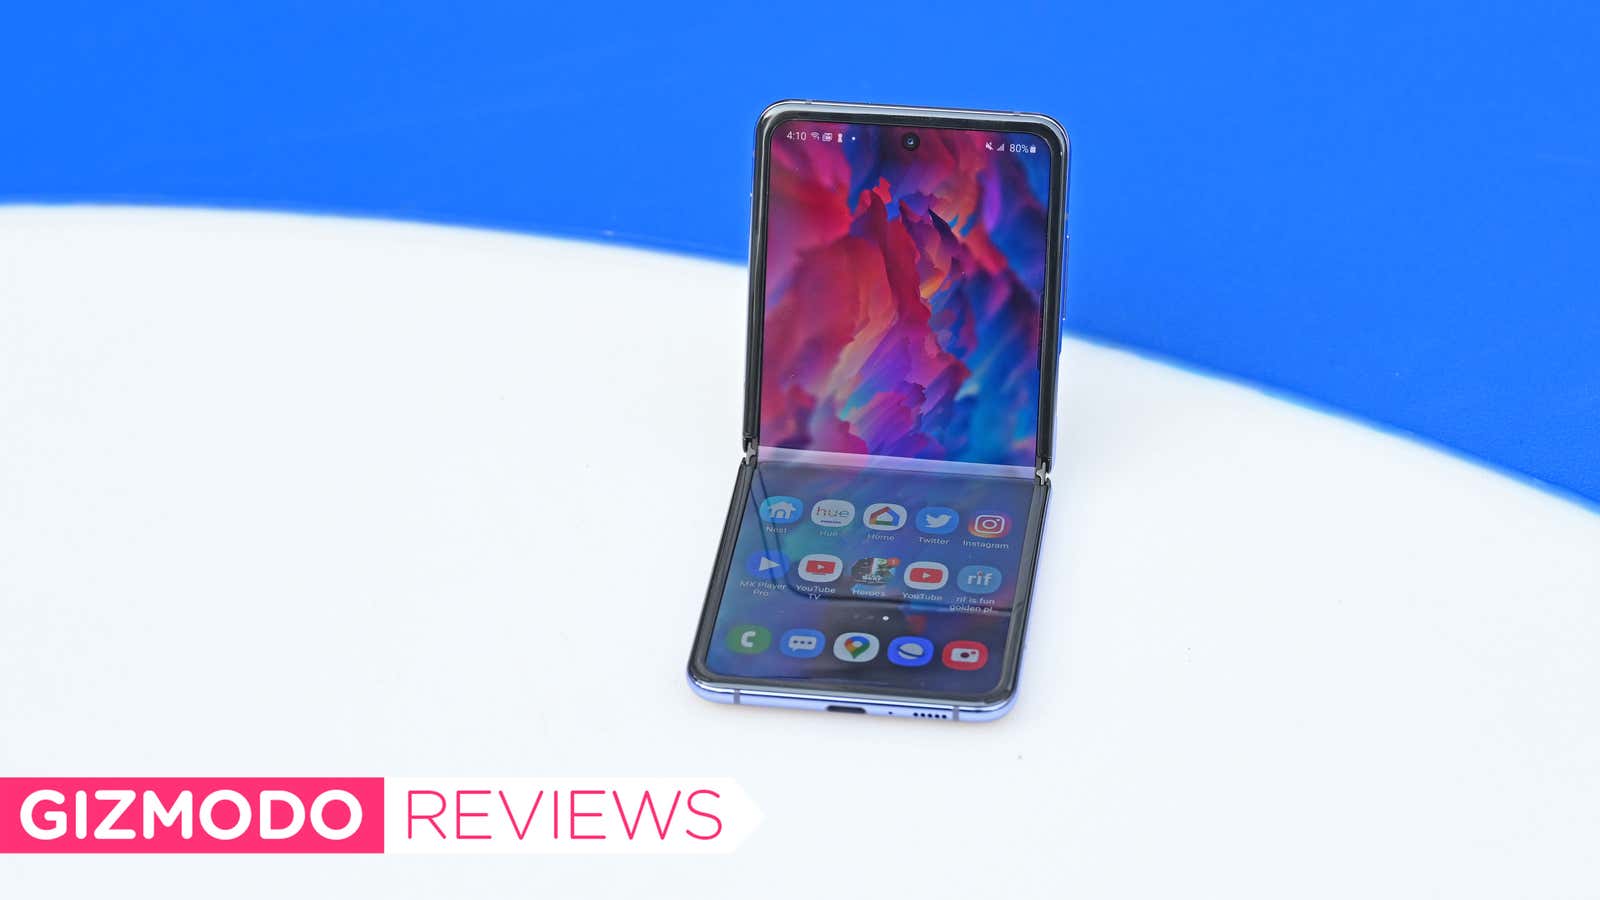 Samsung Galaxy Z Flip 3 review: The first foldable phone under $1,000